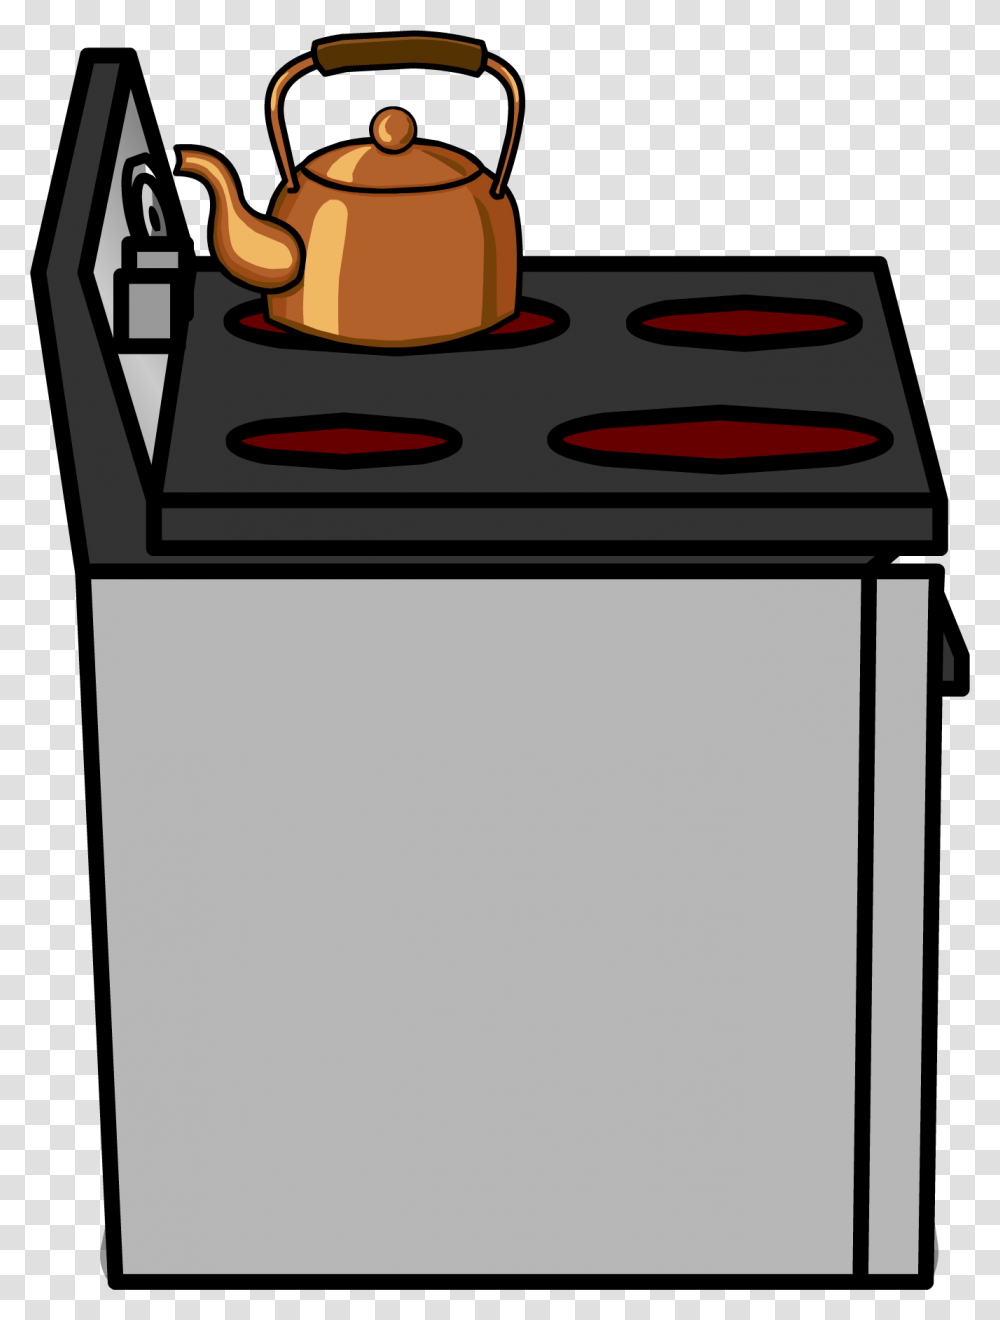 Graphic Library Image Stove Sprite Club Penguin, Appliance, Oven, Pottery, Cooker Transparent Png